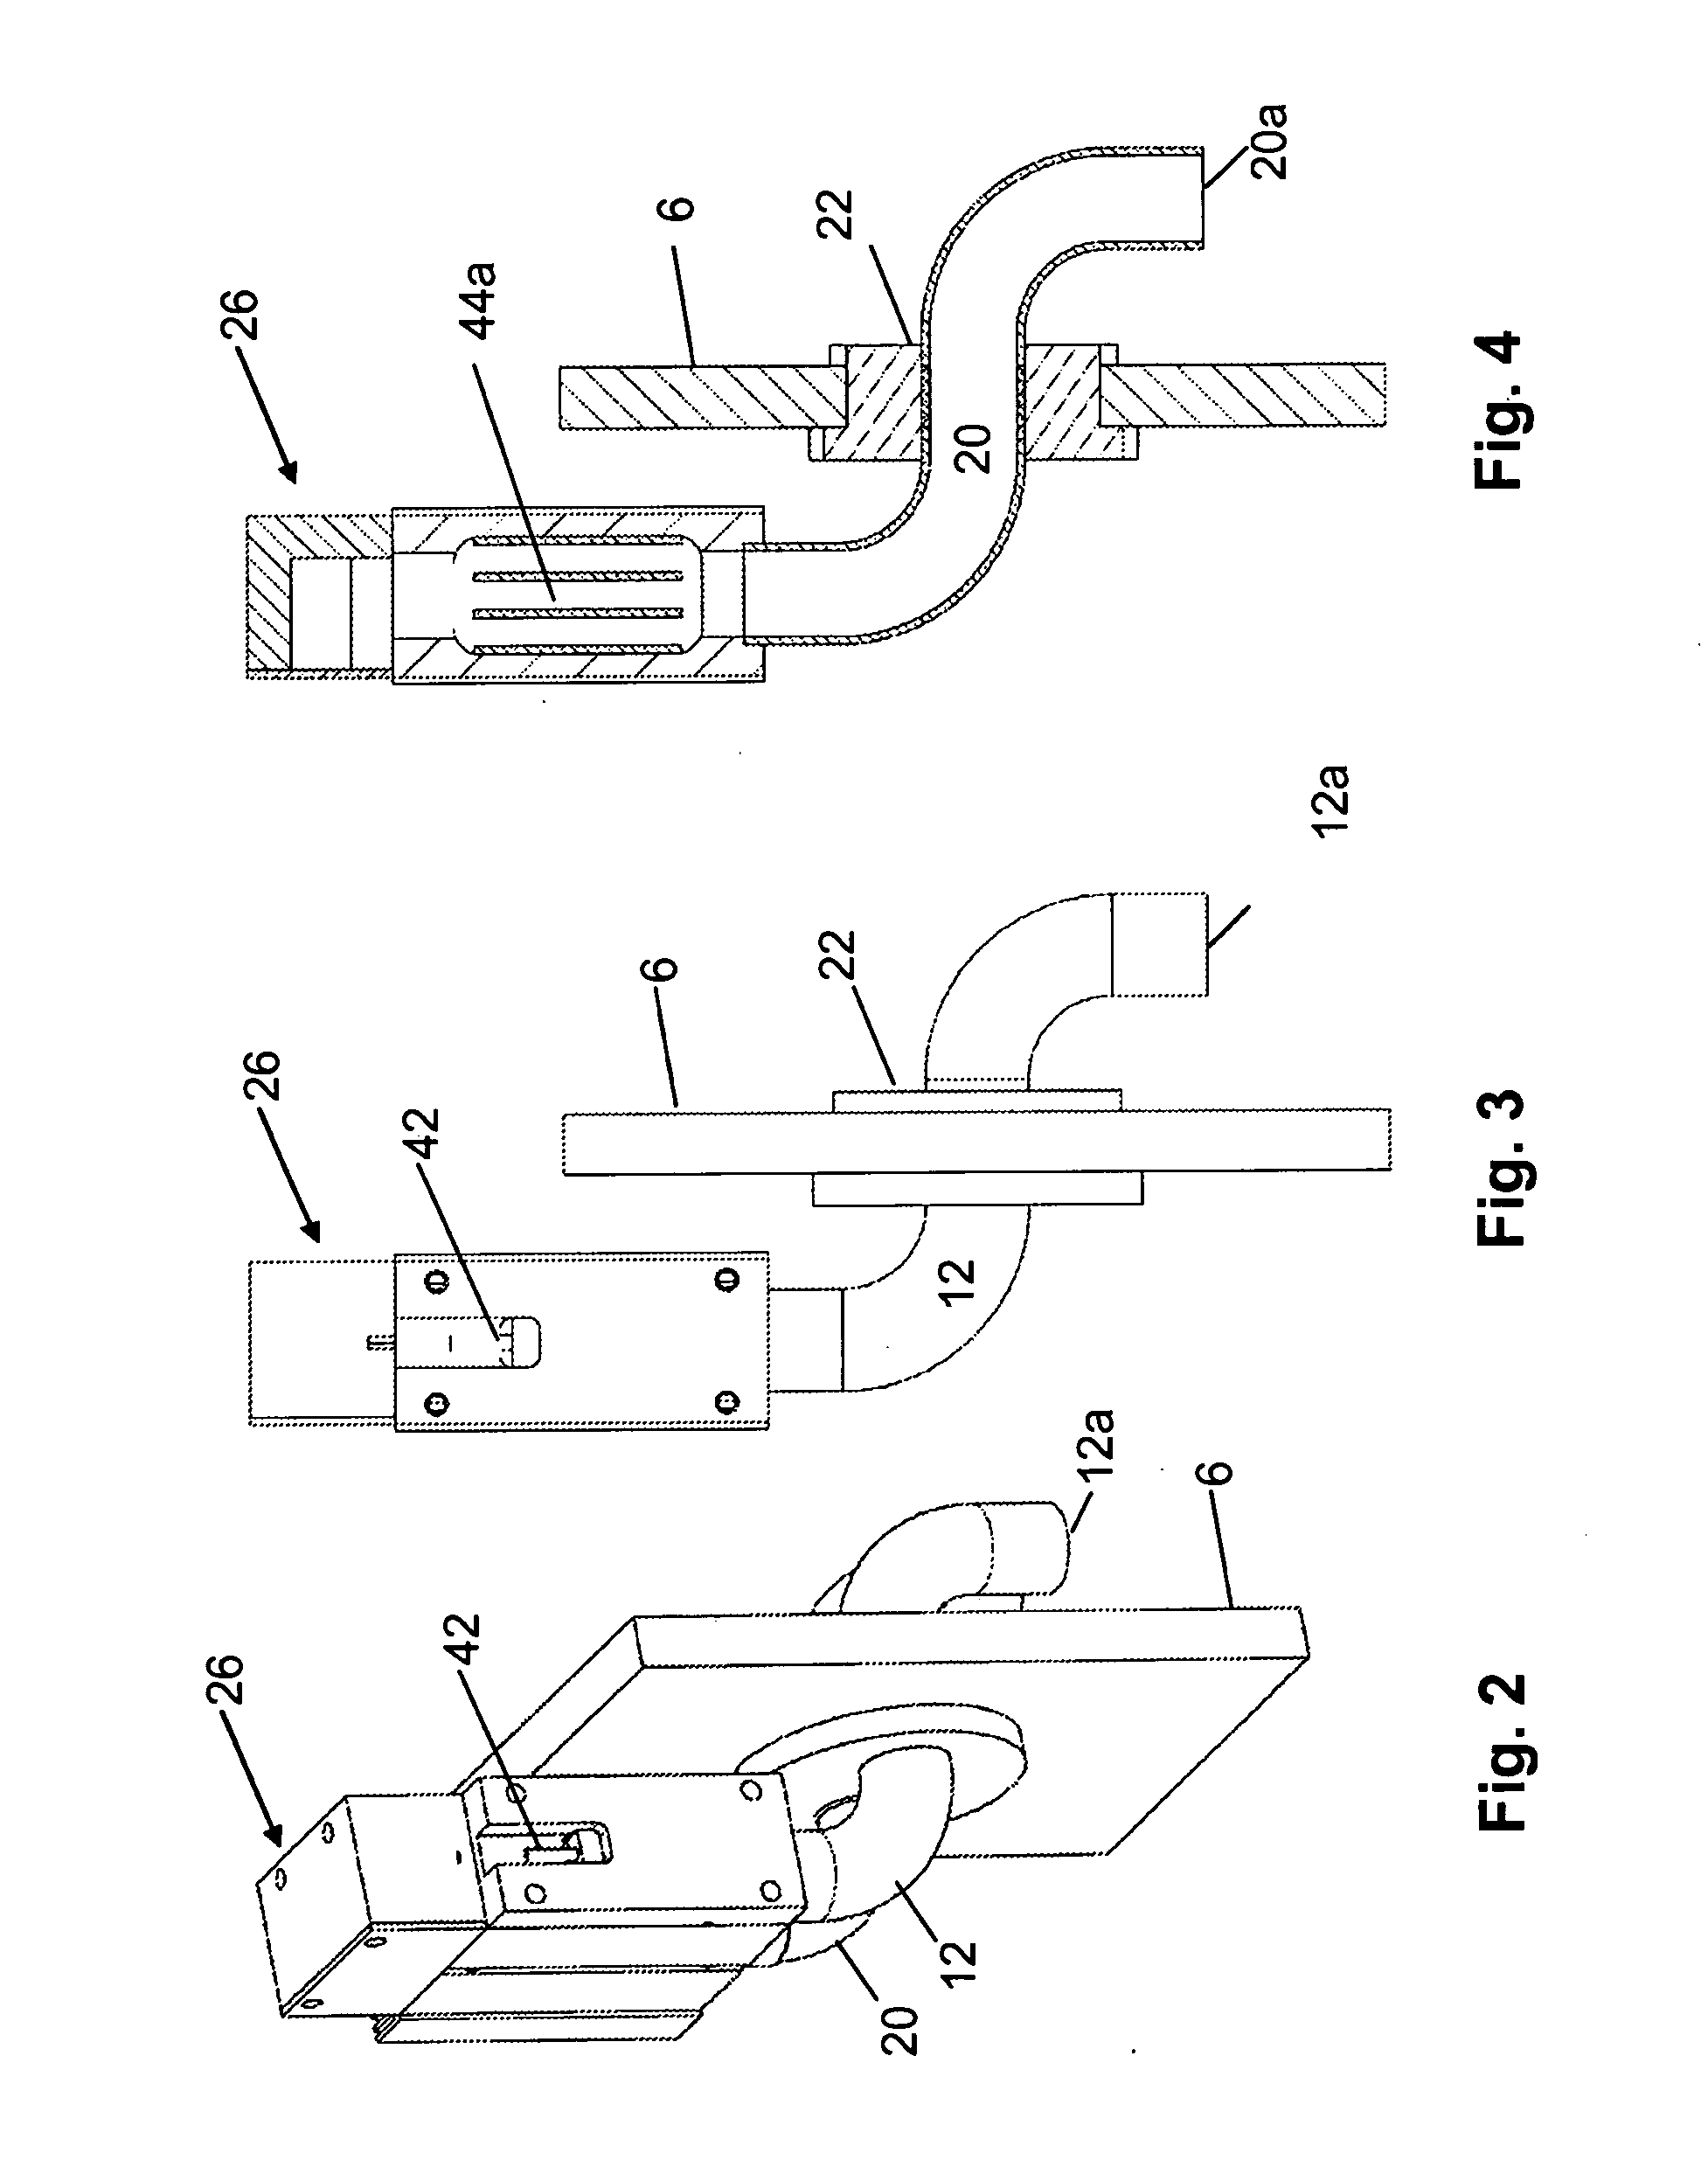 System and method for determining readings of gases and/or an aerosol for a machine